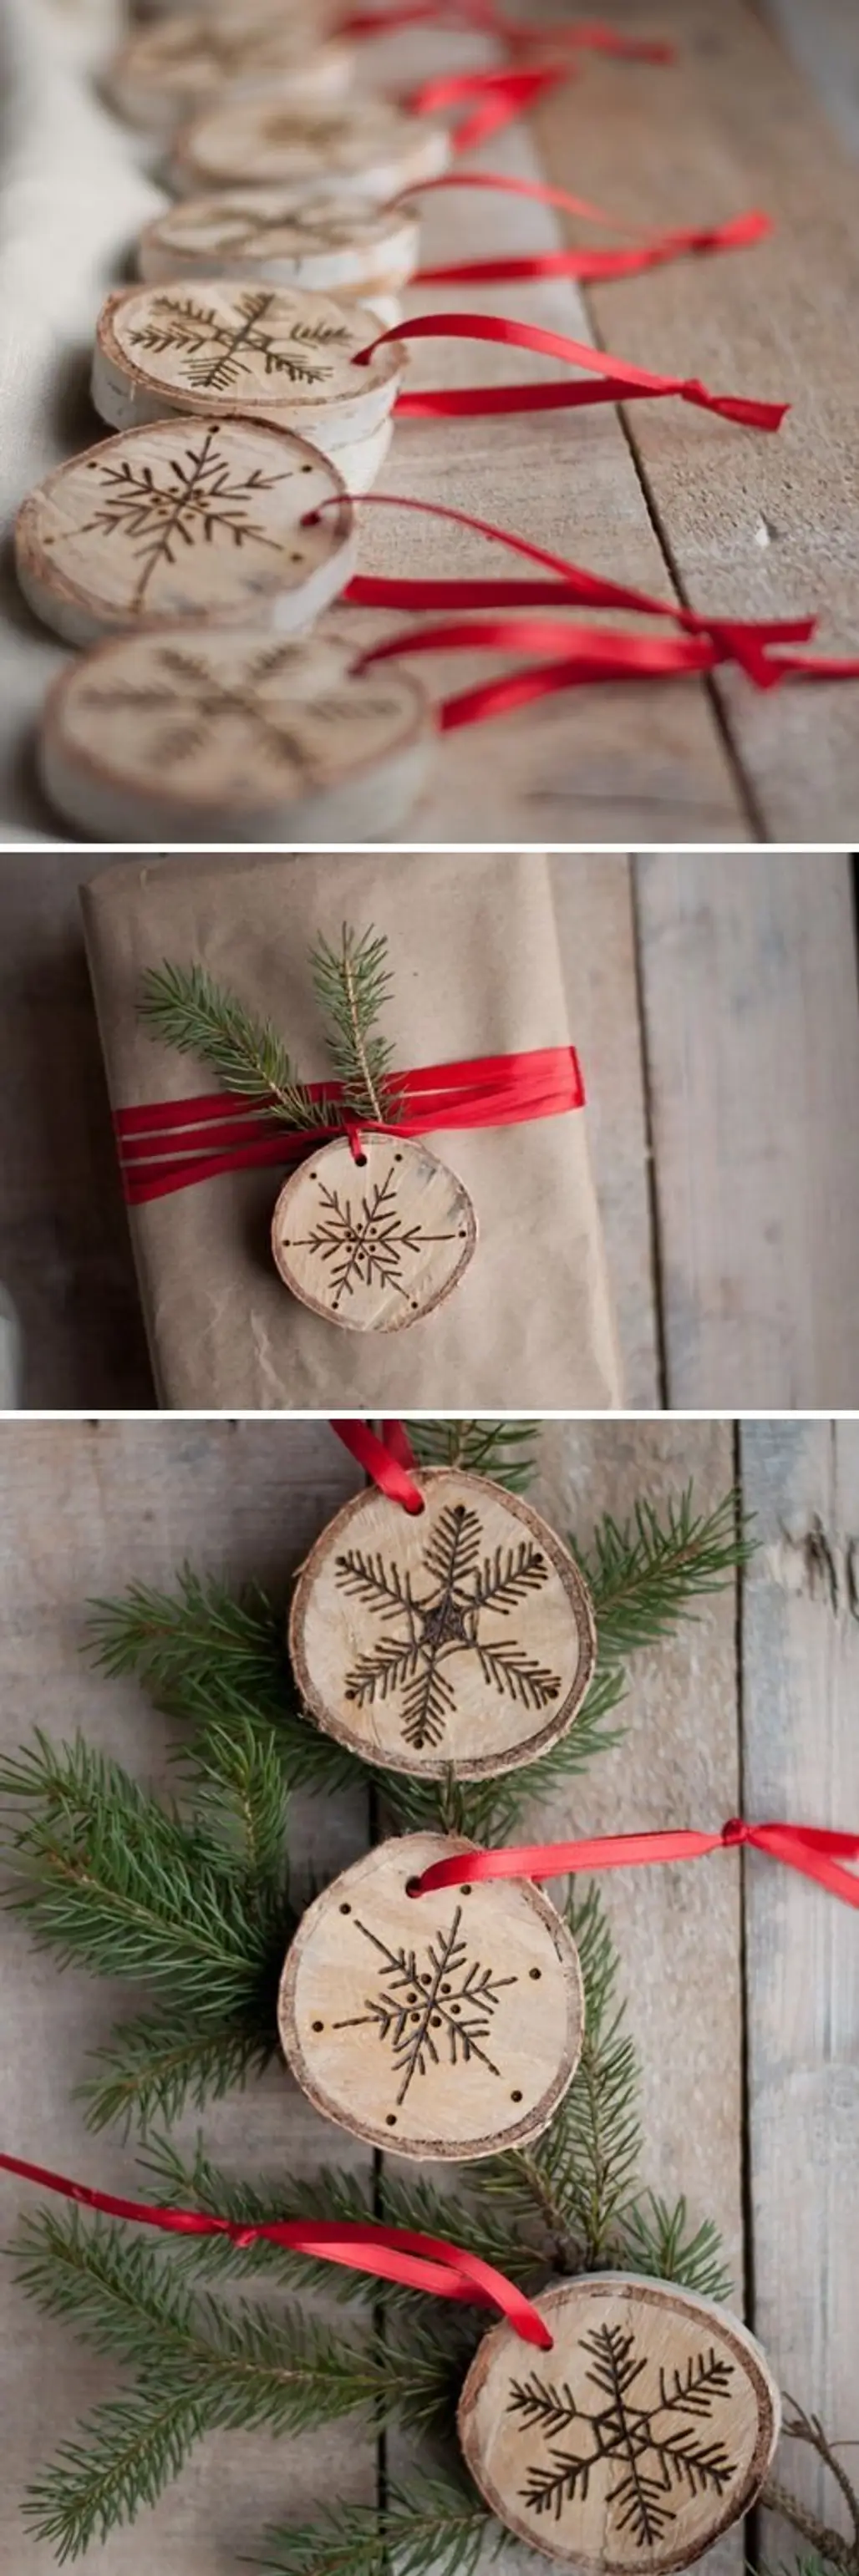 Etched Snowflake Ornaments